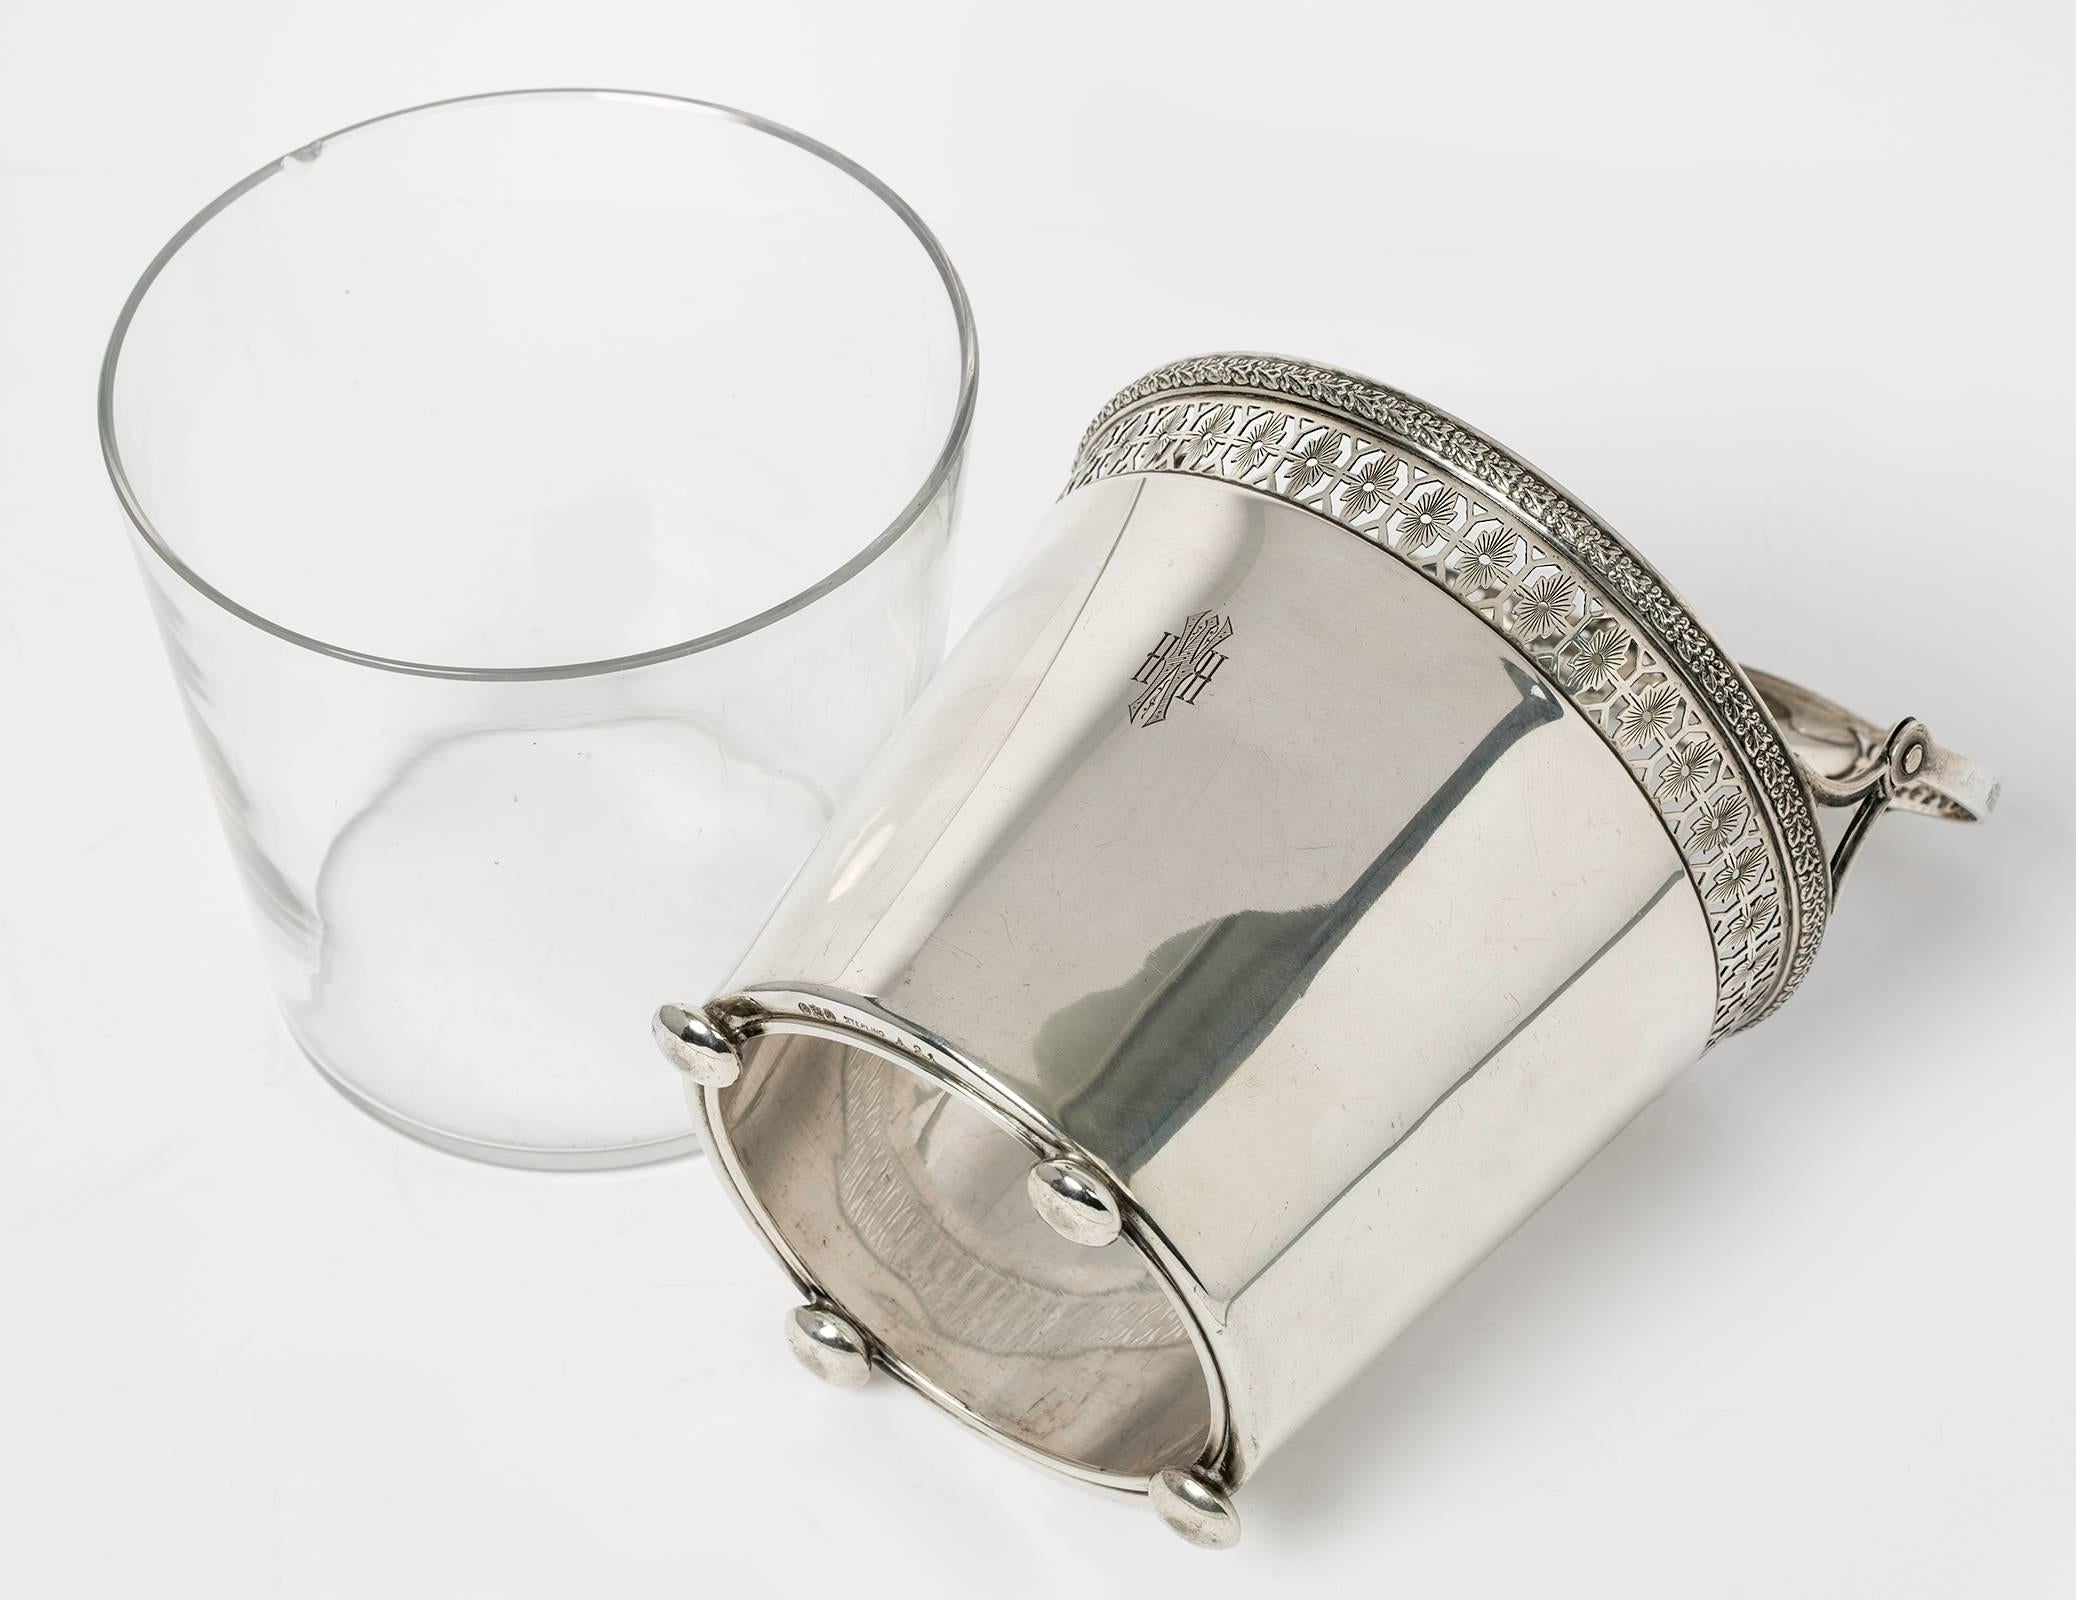 Lovely sterling silver ice bucket with glass liner and handle. Top edge is decoratively bordered with band of pierced work. Stands on small round silver feet. Monogrammed HWH.
Minor wear and dimples. Lovely used condition.
Bucket size without the